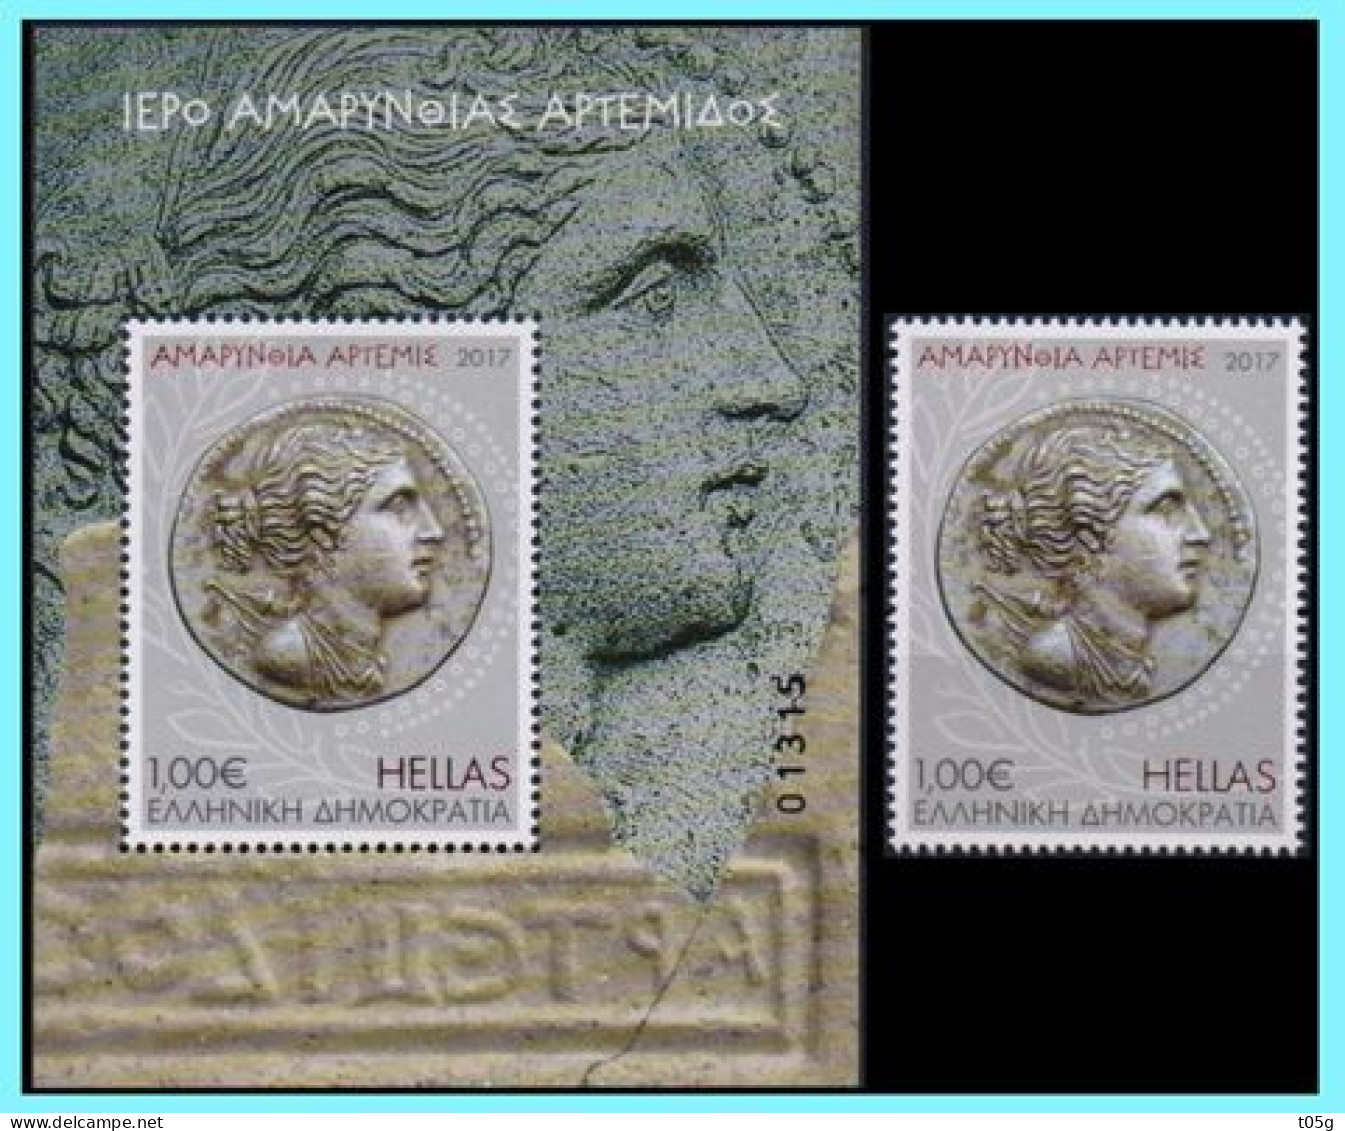 GREECE - GRECE-HELLAS 24.11.2017: Compl. Set (sheet & Stamp) MNH** Temple Of Amarynthis Artemidos - Unused Stamps